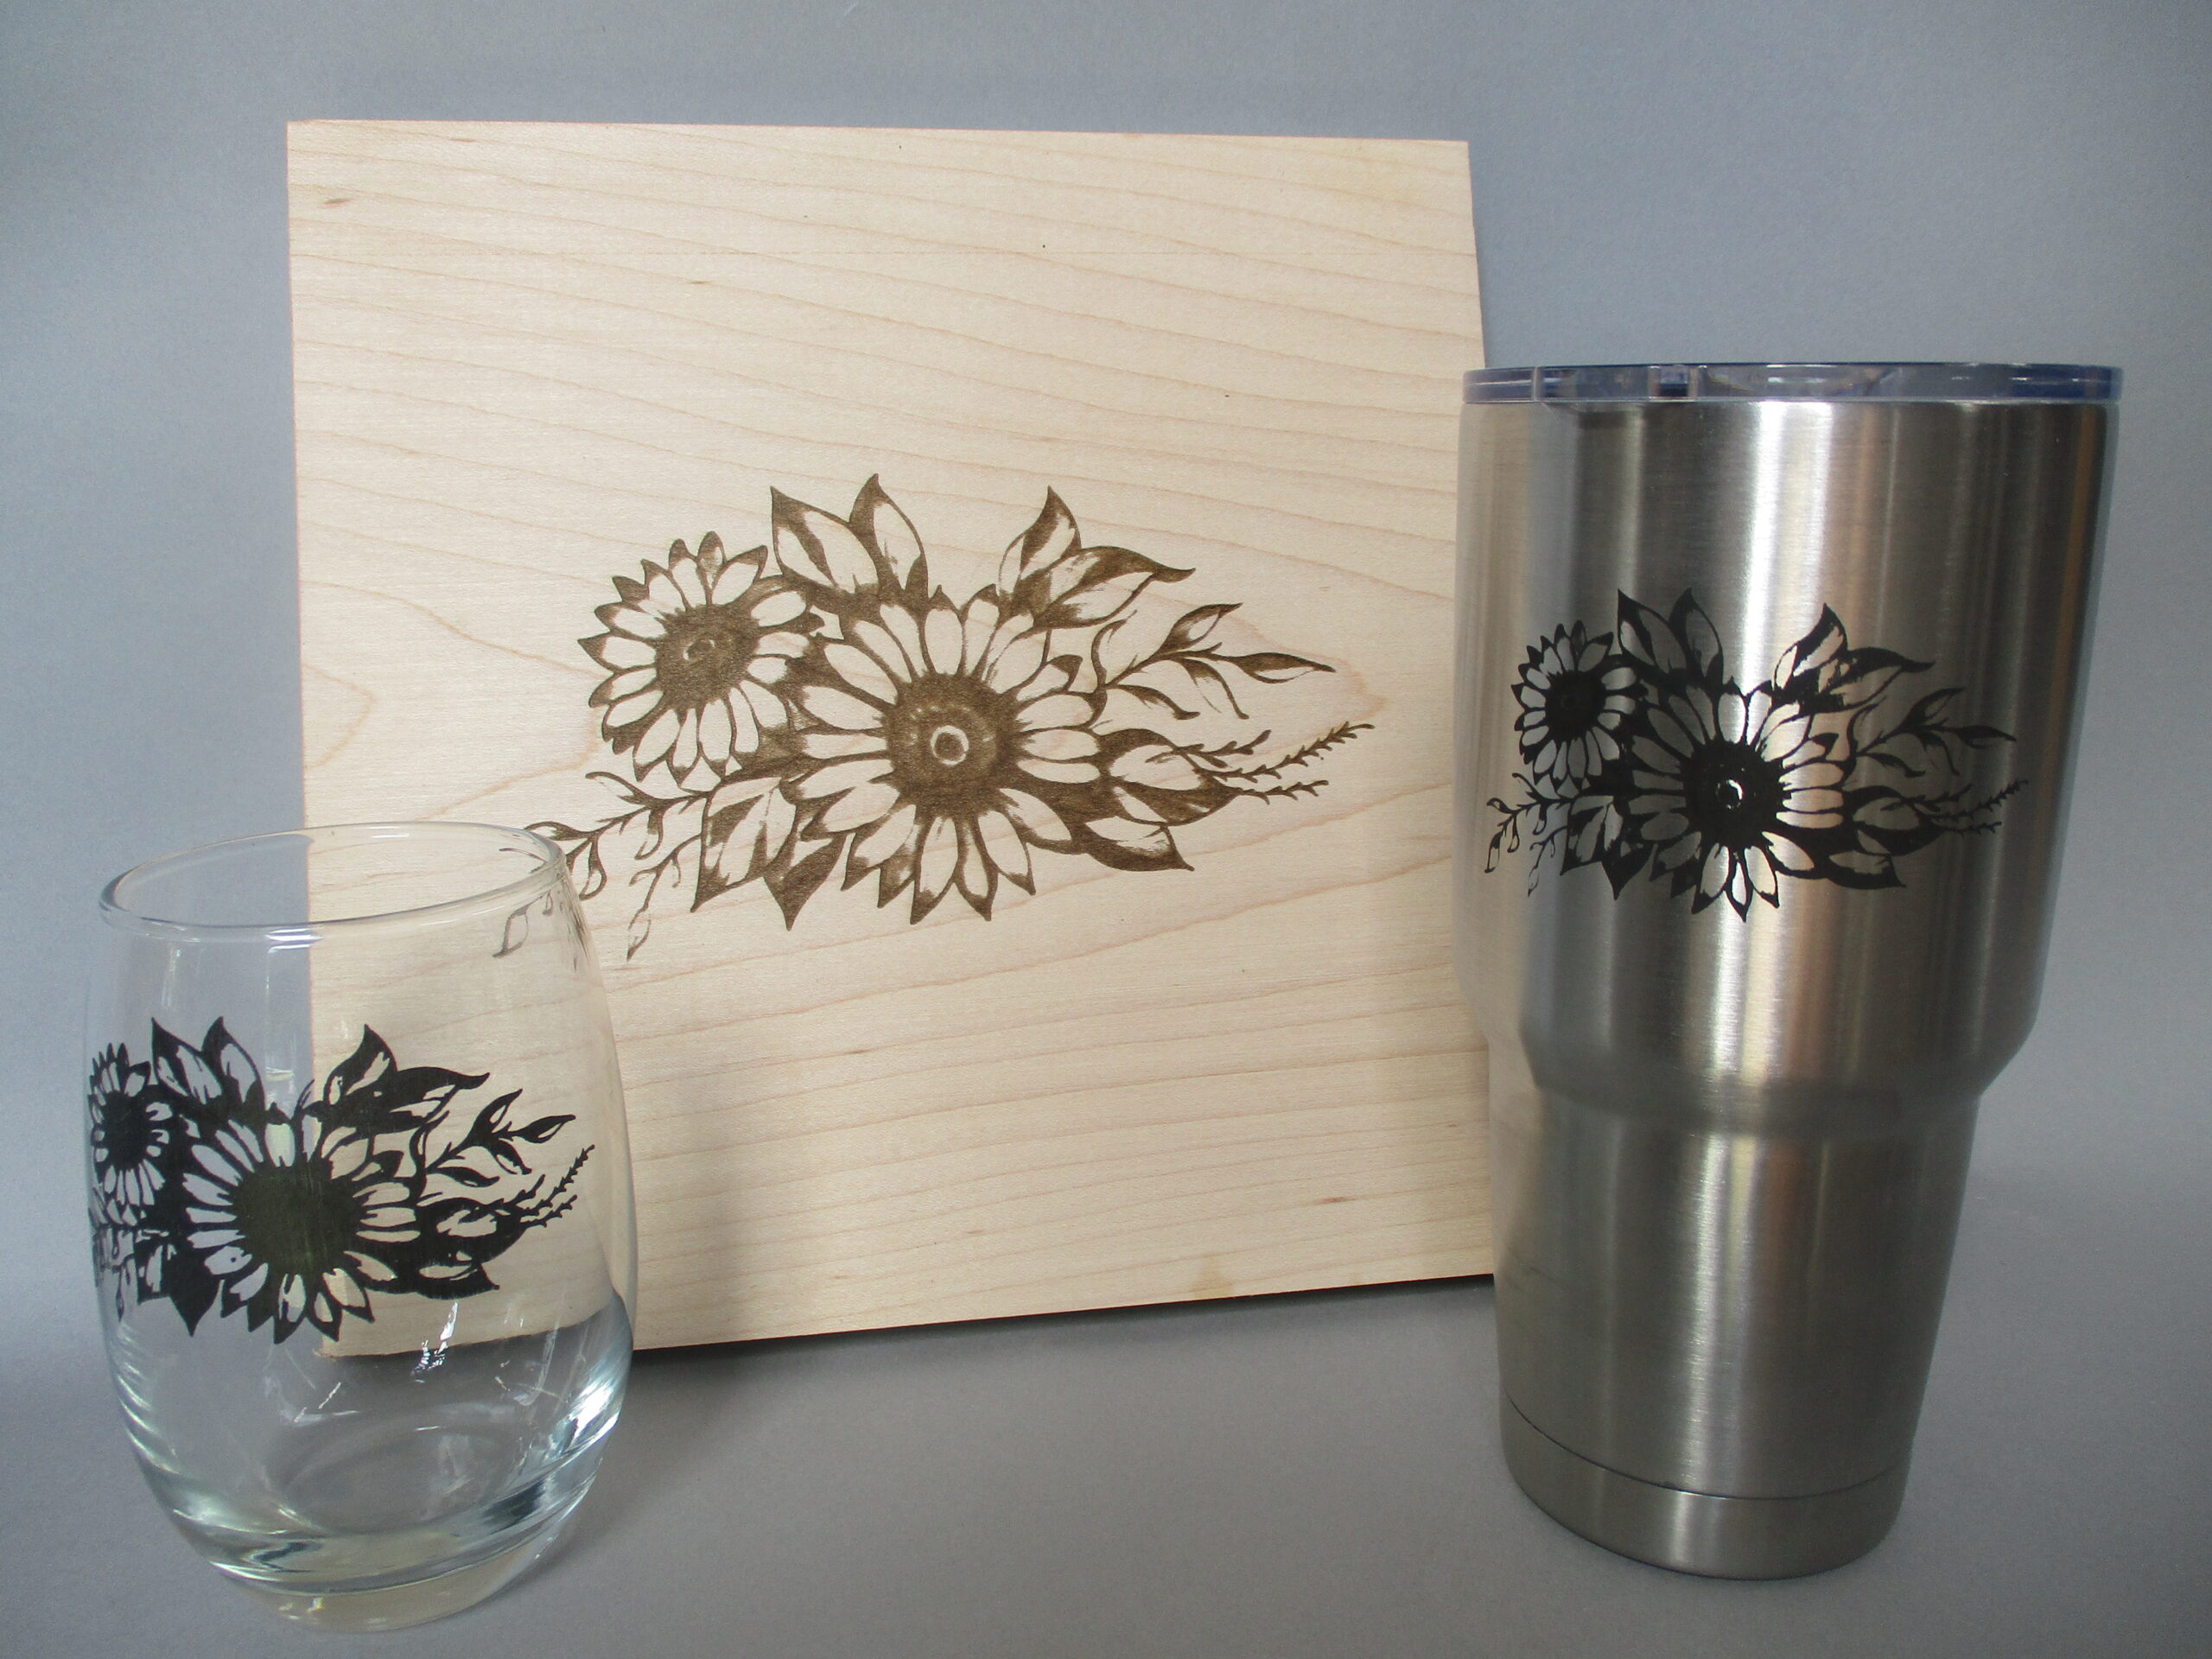 Laser engraved glass, tumbler, and trivet as a birthday gift.